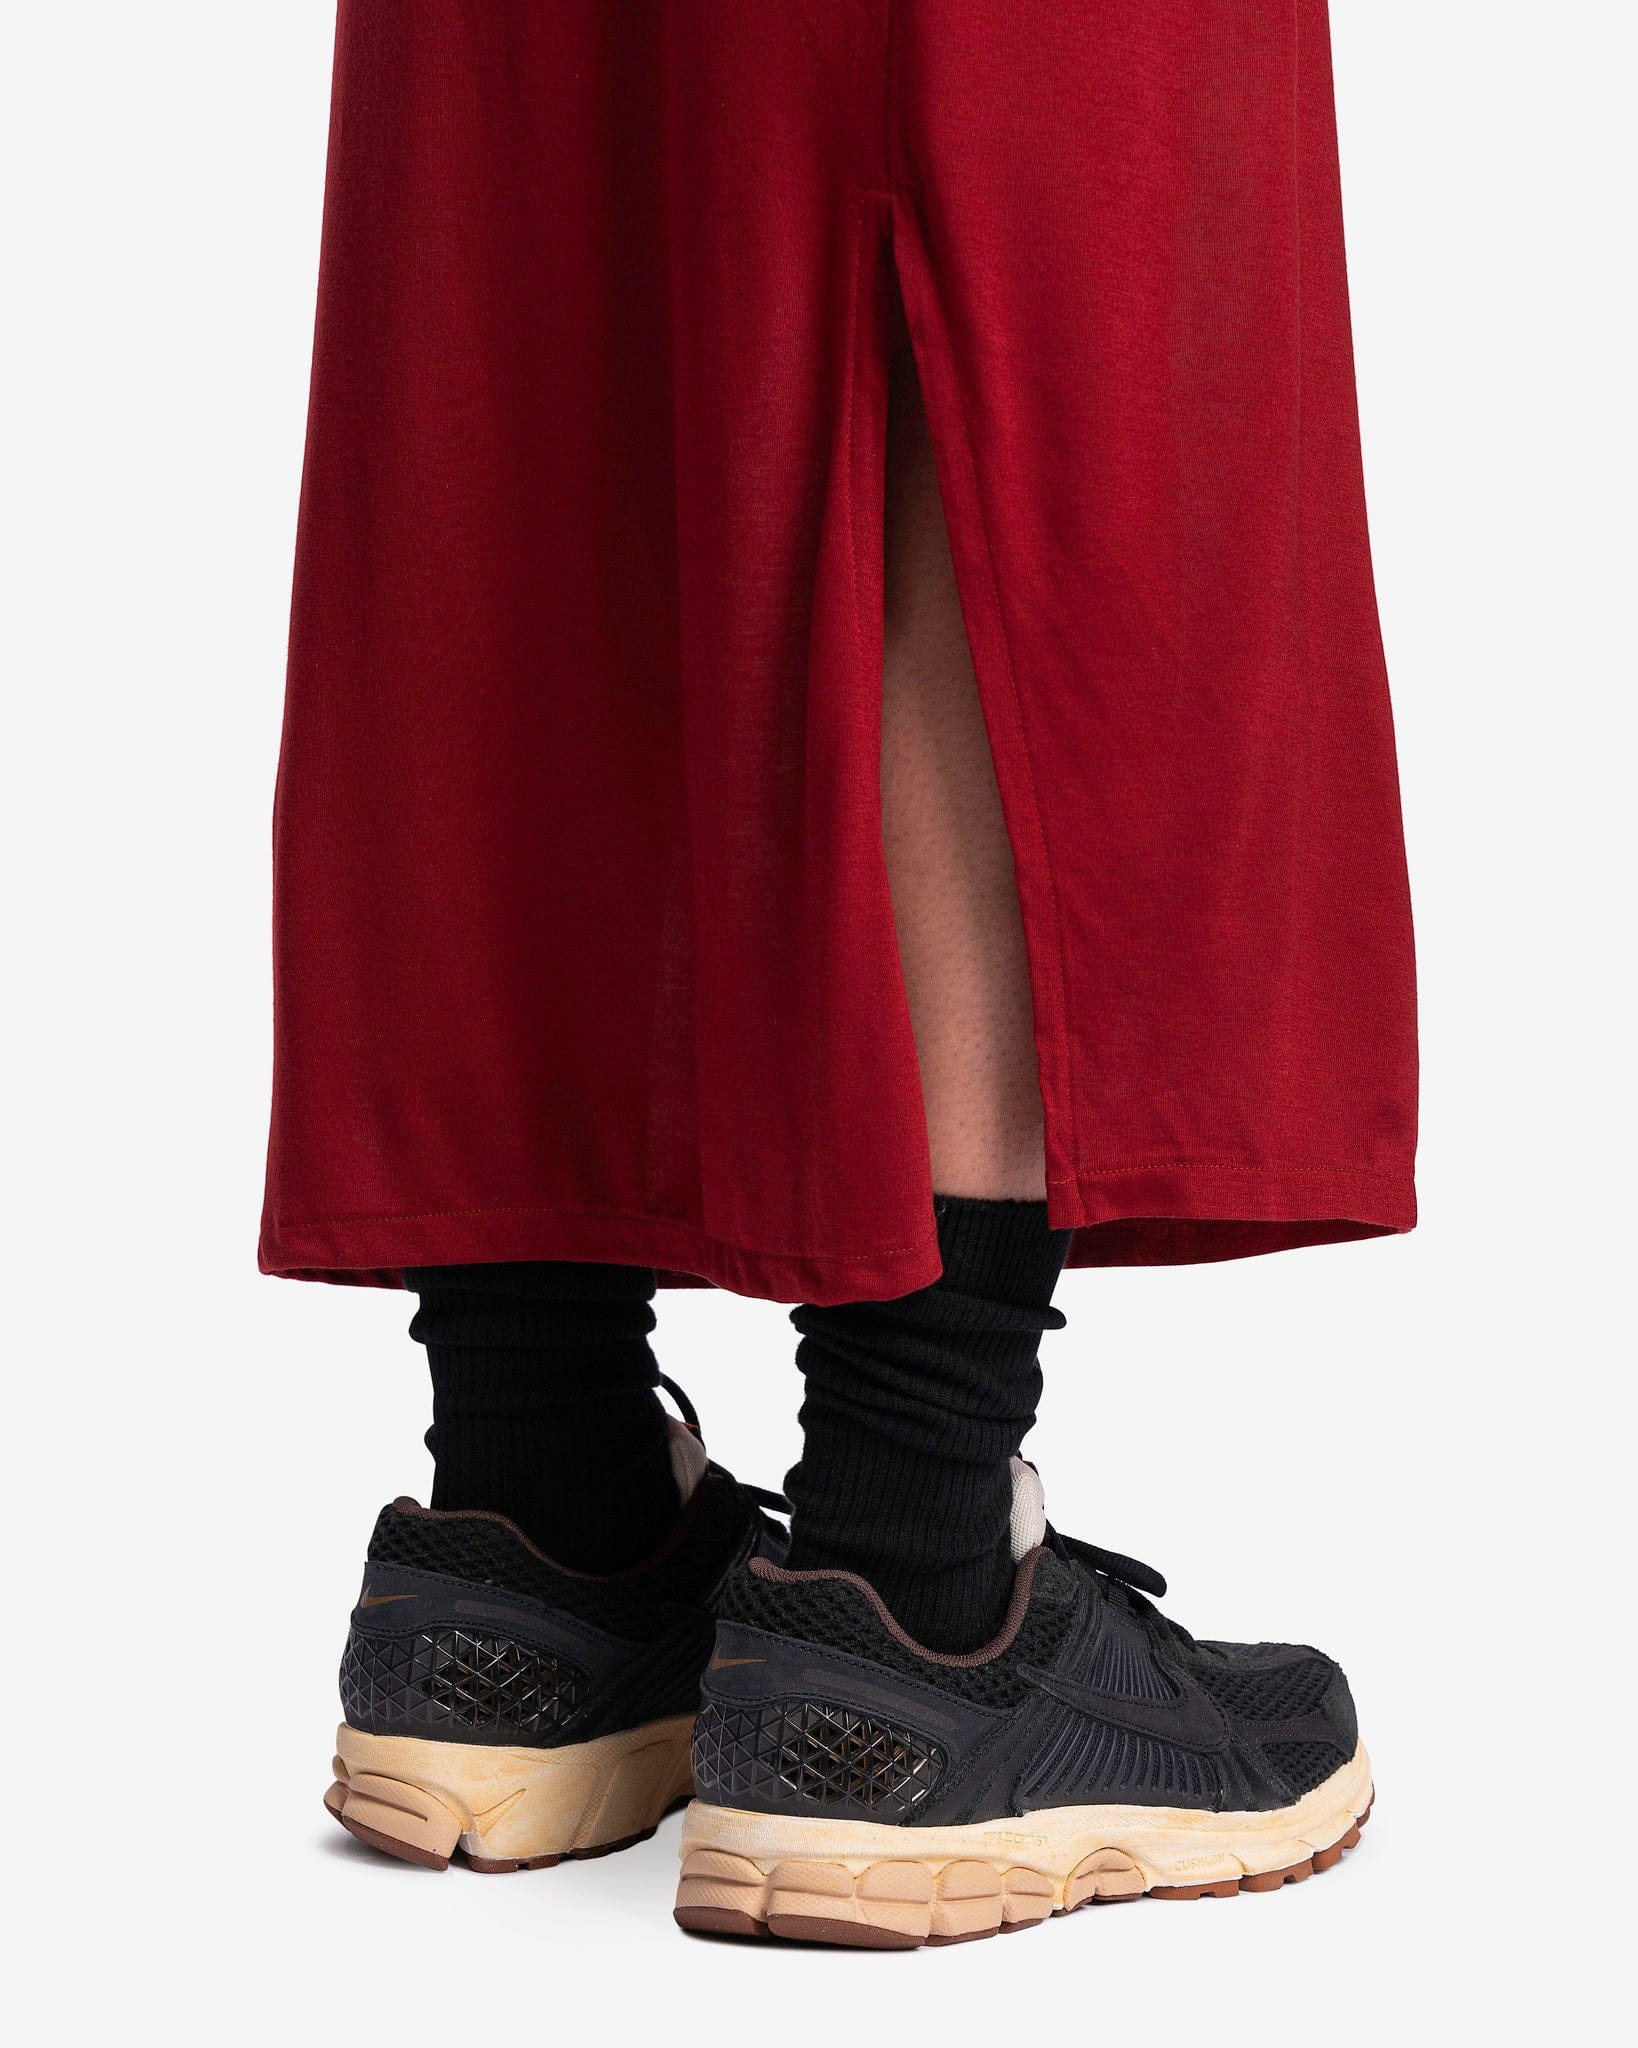 POST ARCHIVE FACTION (P.A.F) Women Skirts 5.0+ Skirt Right in Burgundy